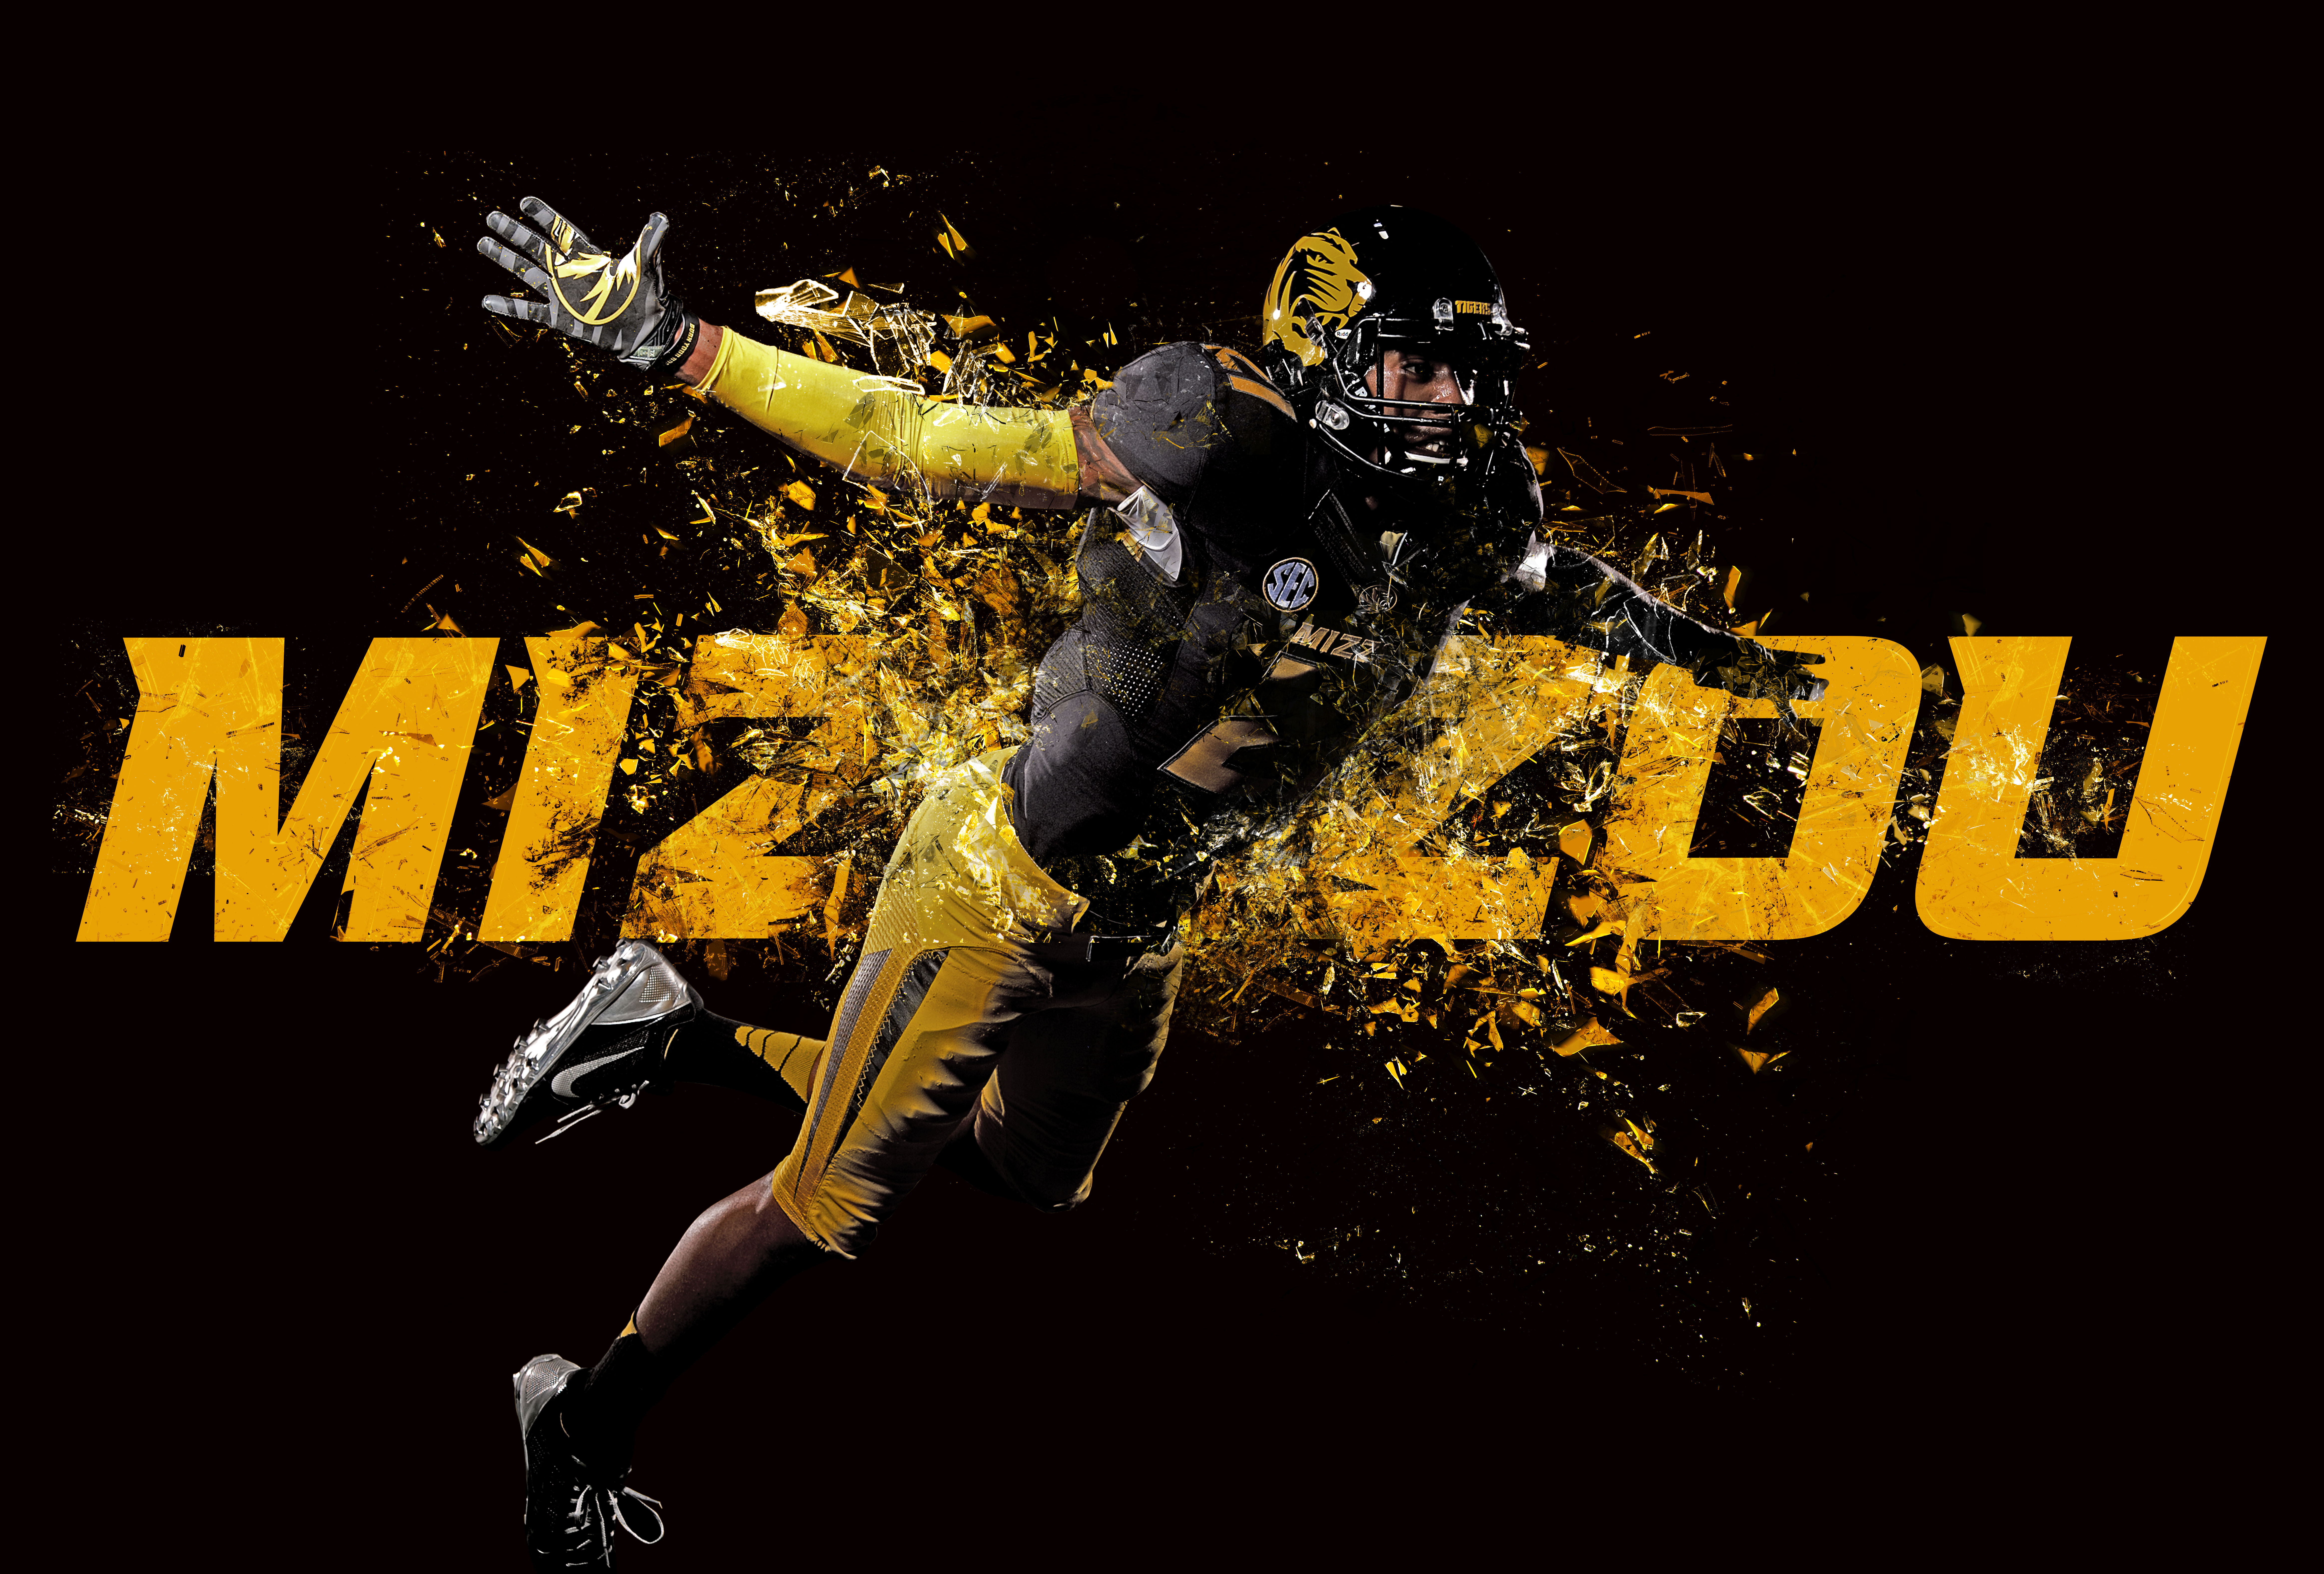 Wallpaper Versions Of Mizzou S Posters To Share They Re Pretty